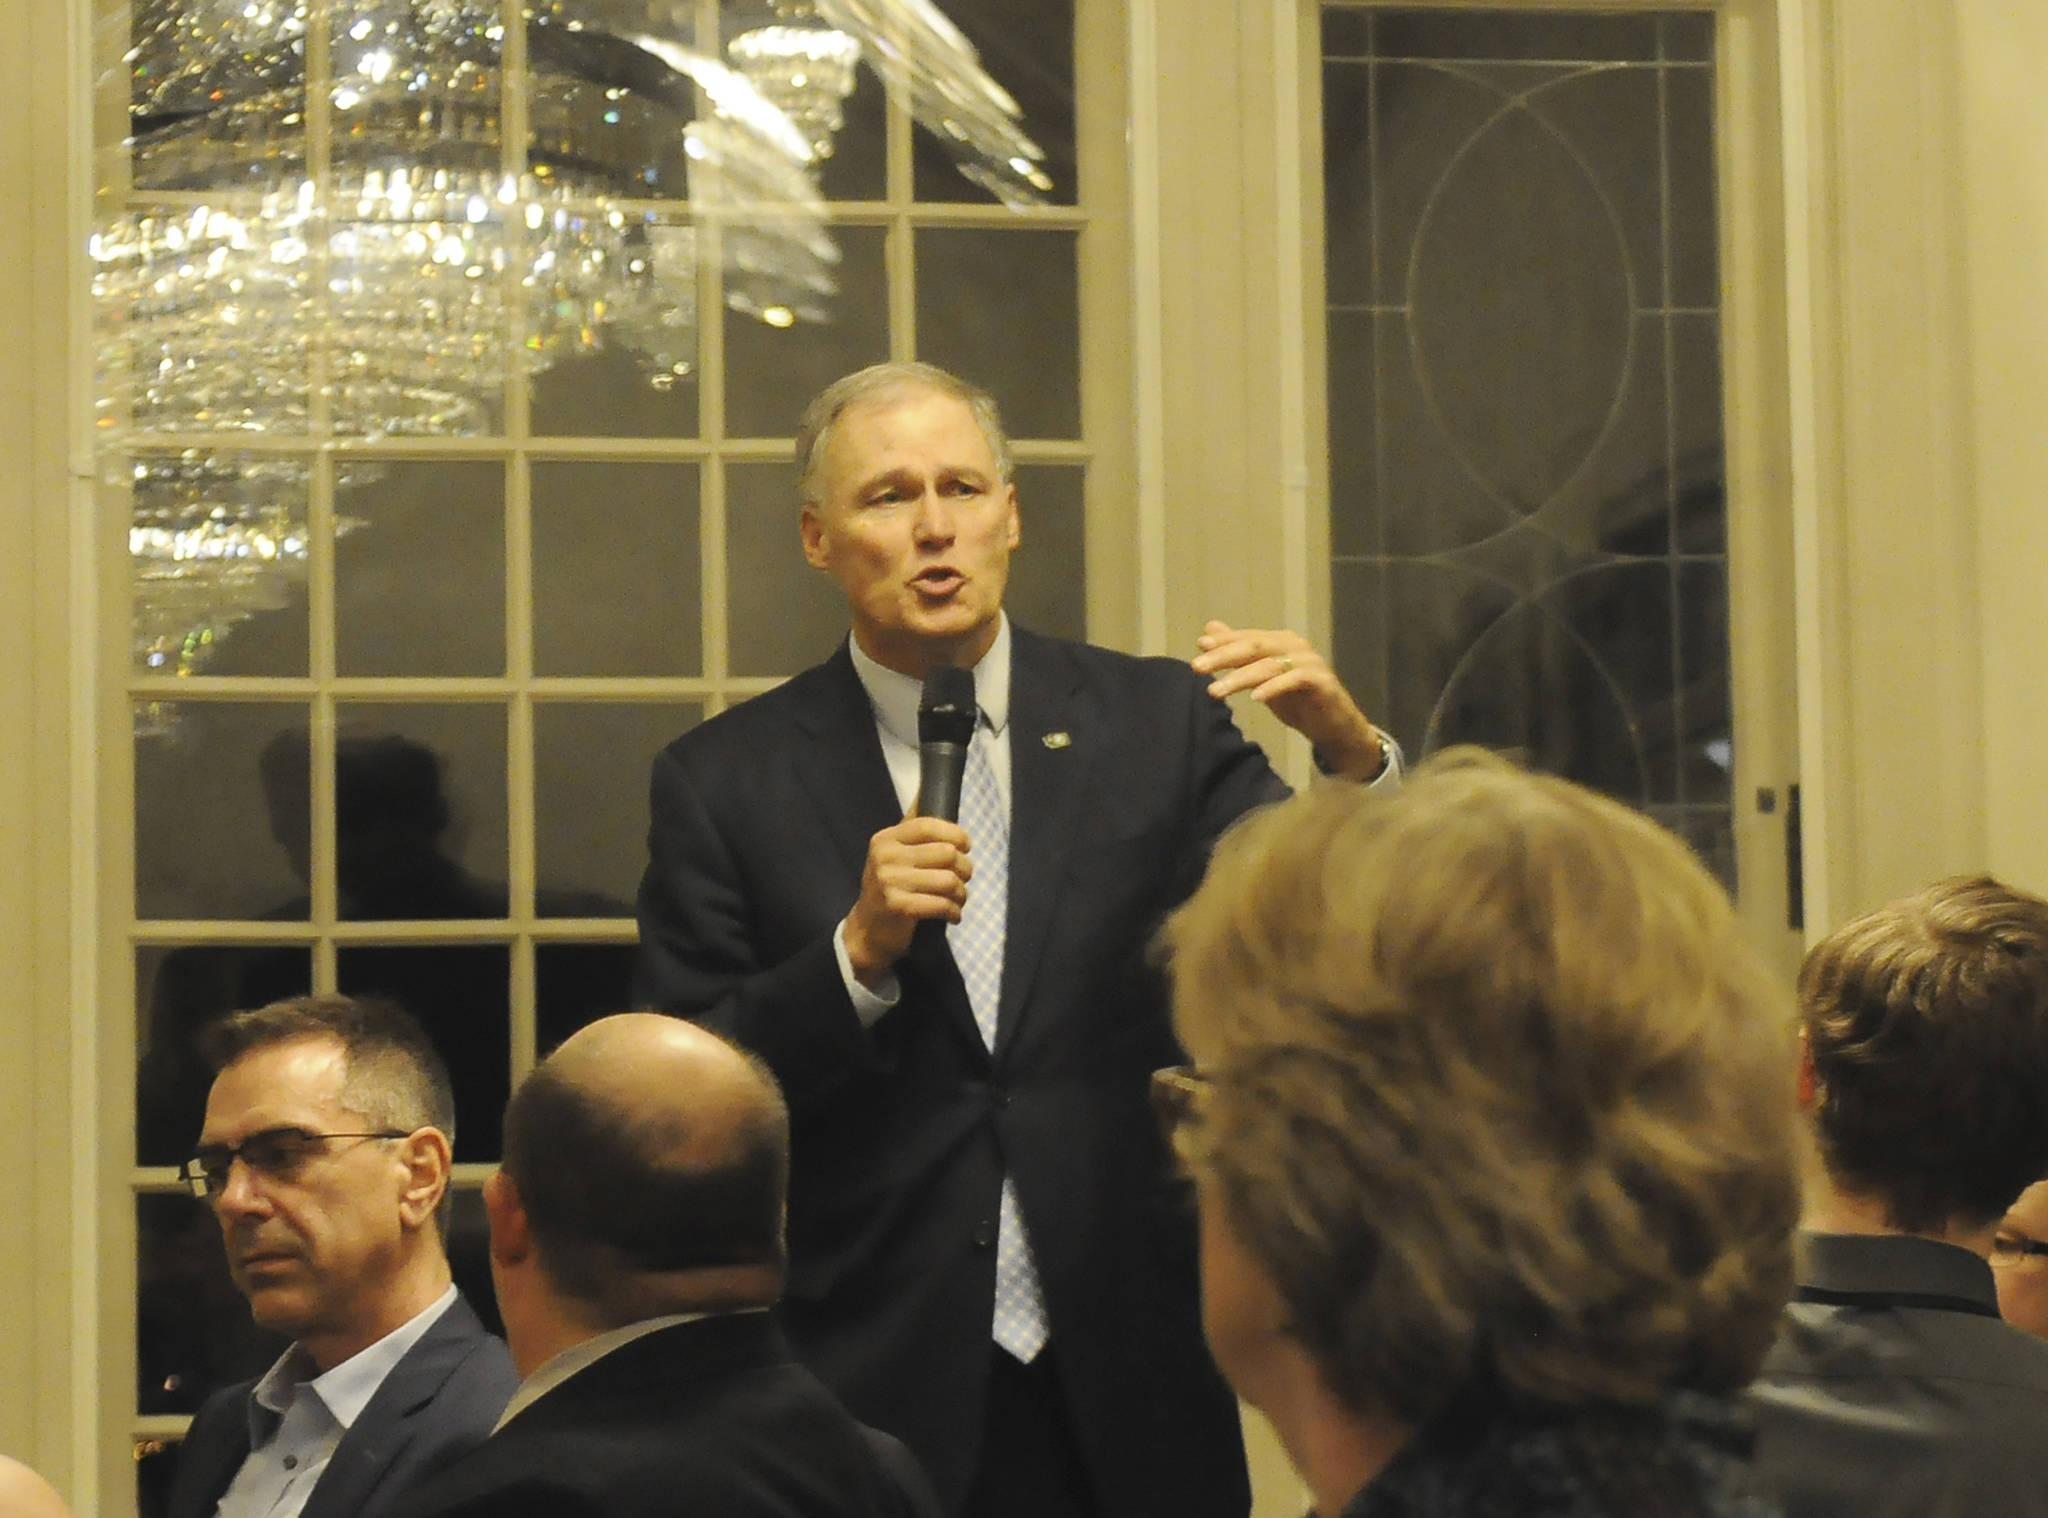 Gov. Jay Inslee talks with members of the media at the Governor’s mansion in Olympia in February 2018. Inslee said Washington state residents can expect to be dealing with the 2019 novel coronavirus for several months until a vaccine can be developed and widely distributed. Sequim Gazette file photo by Michael Dashiell